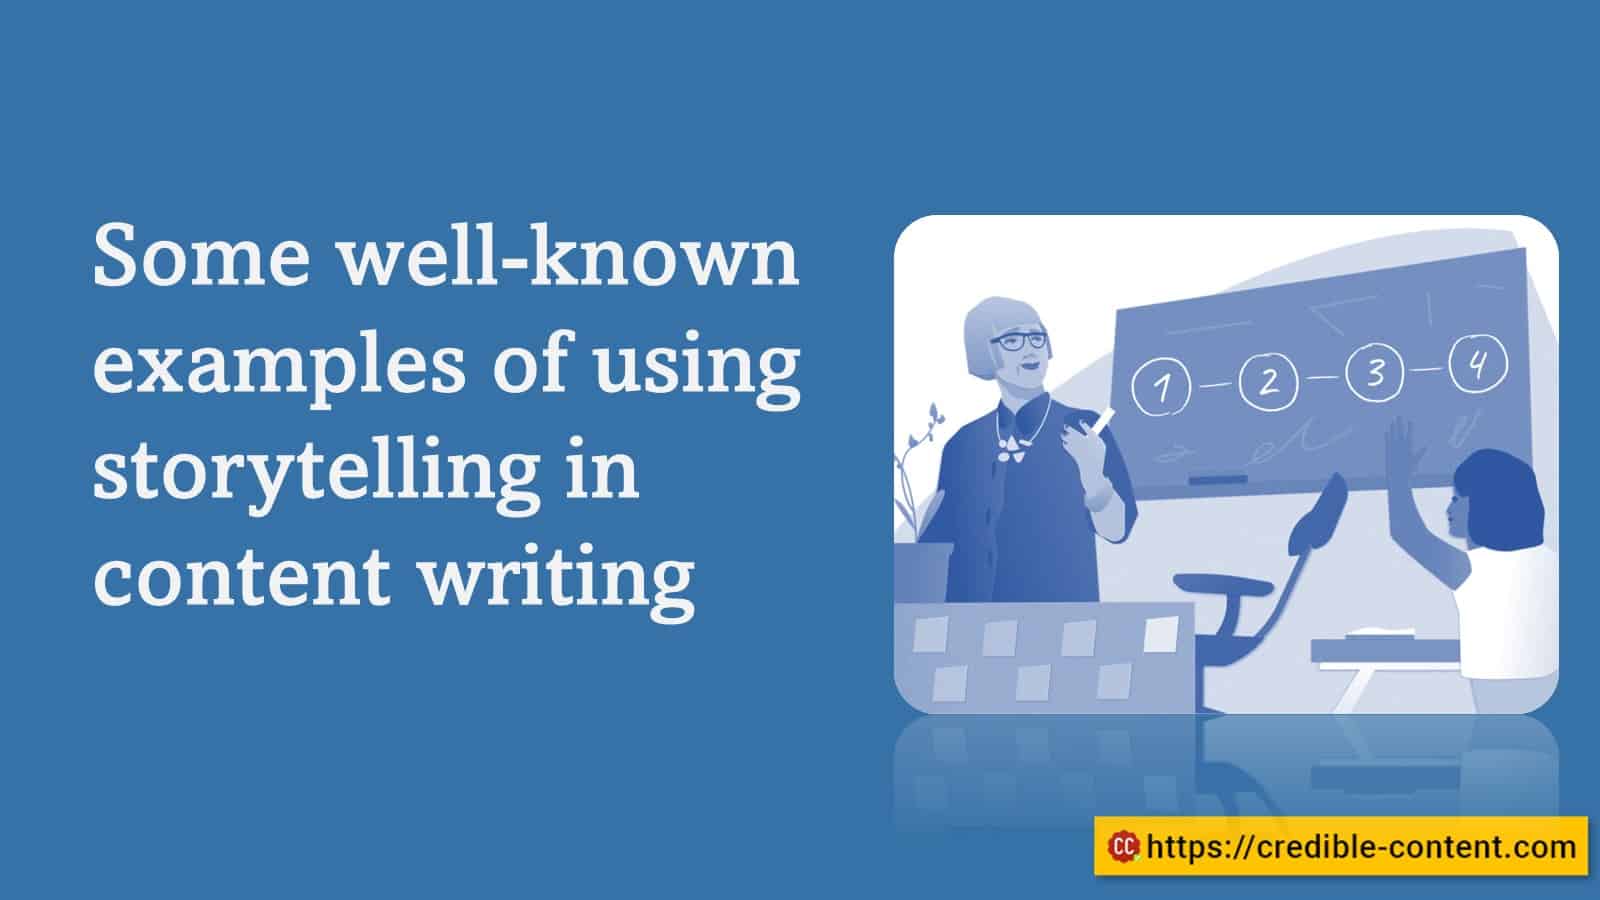 Some well-known examples of using storytelling in content writing